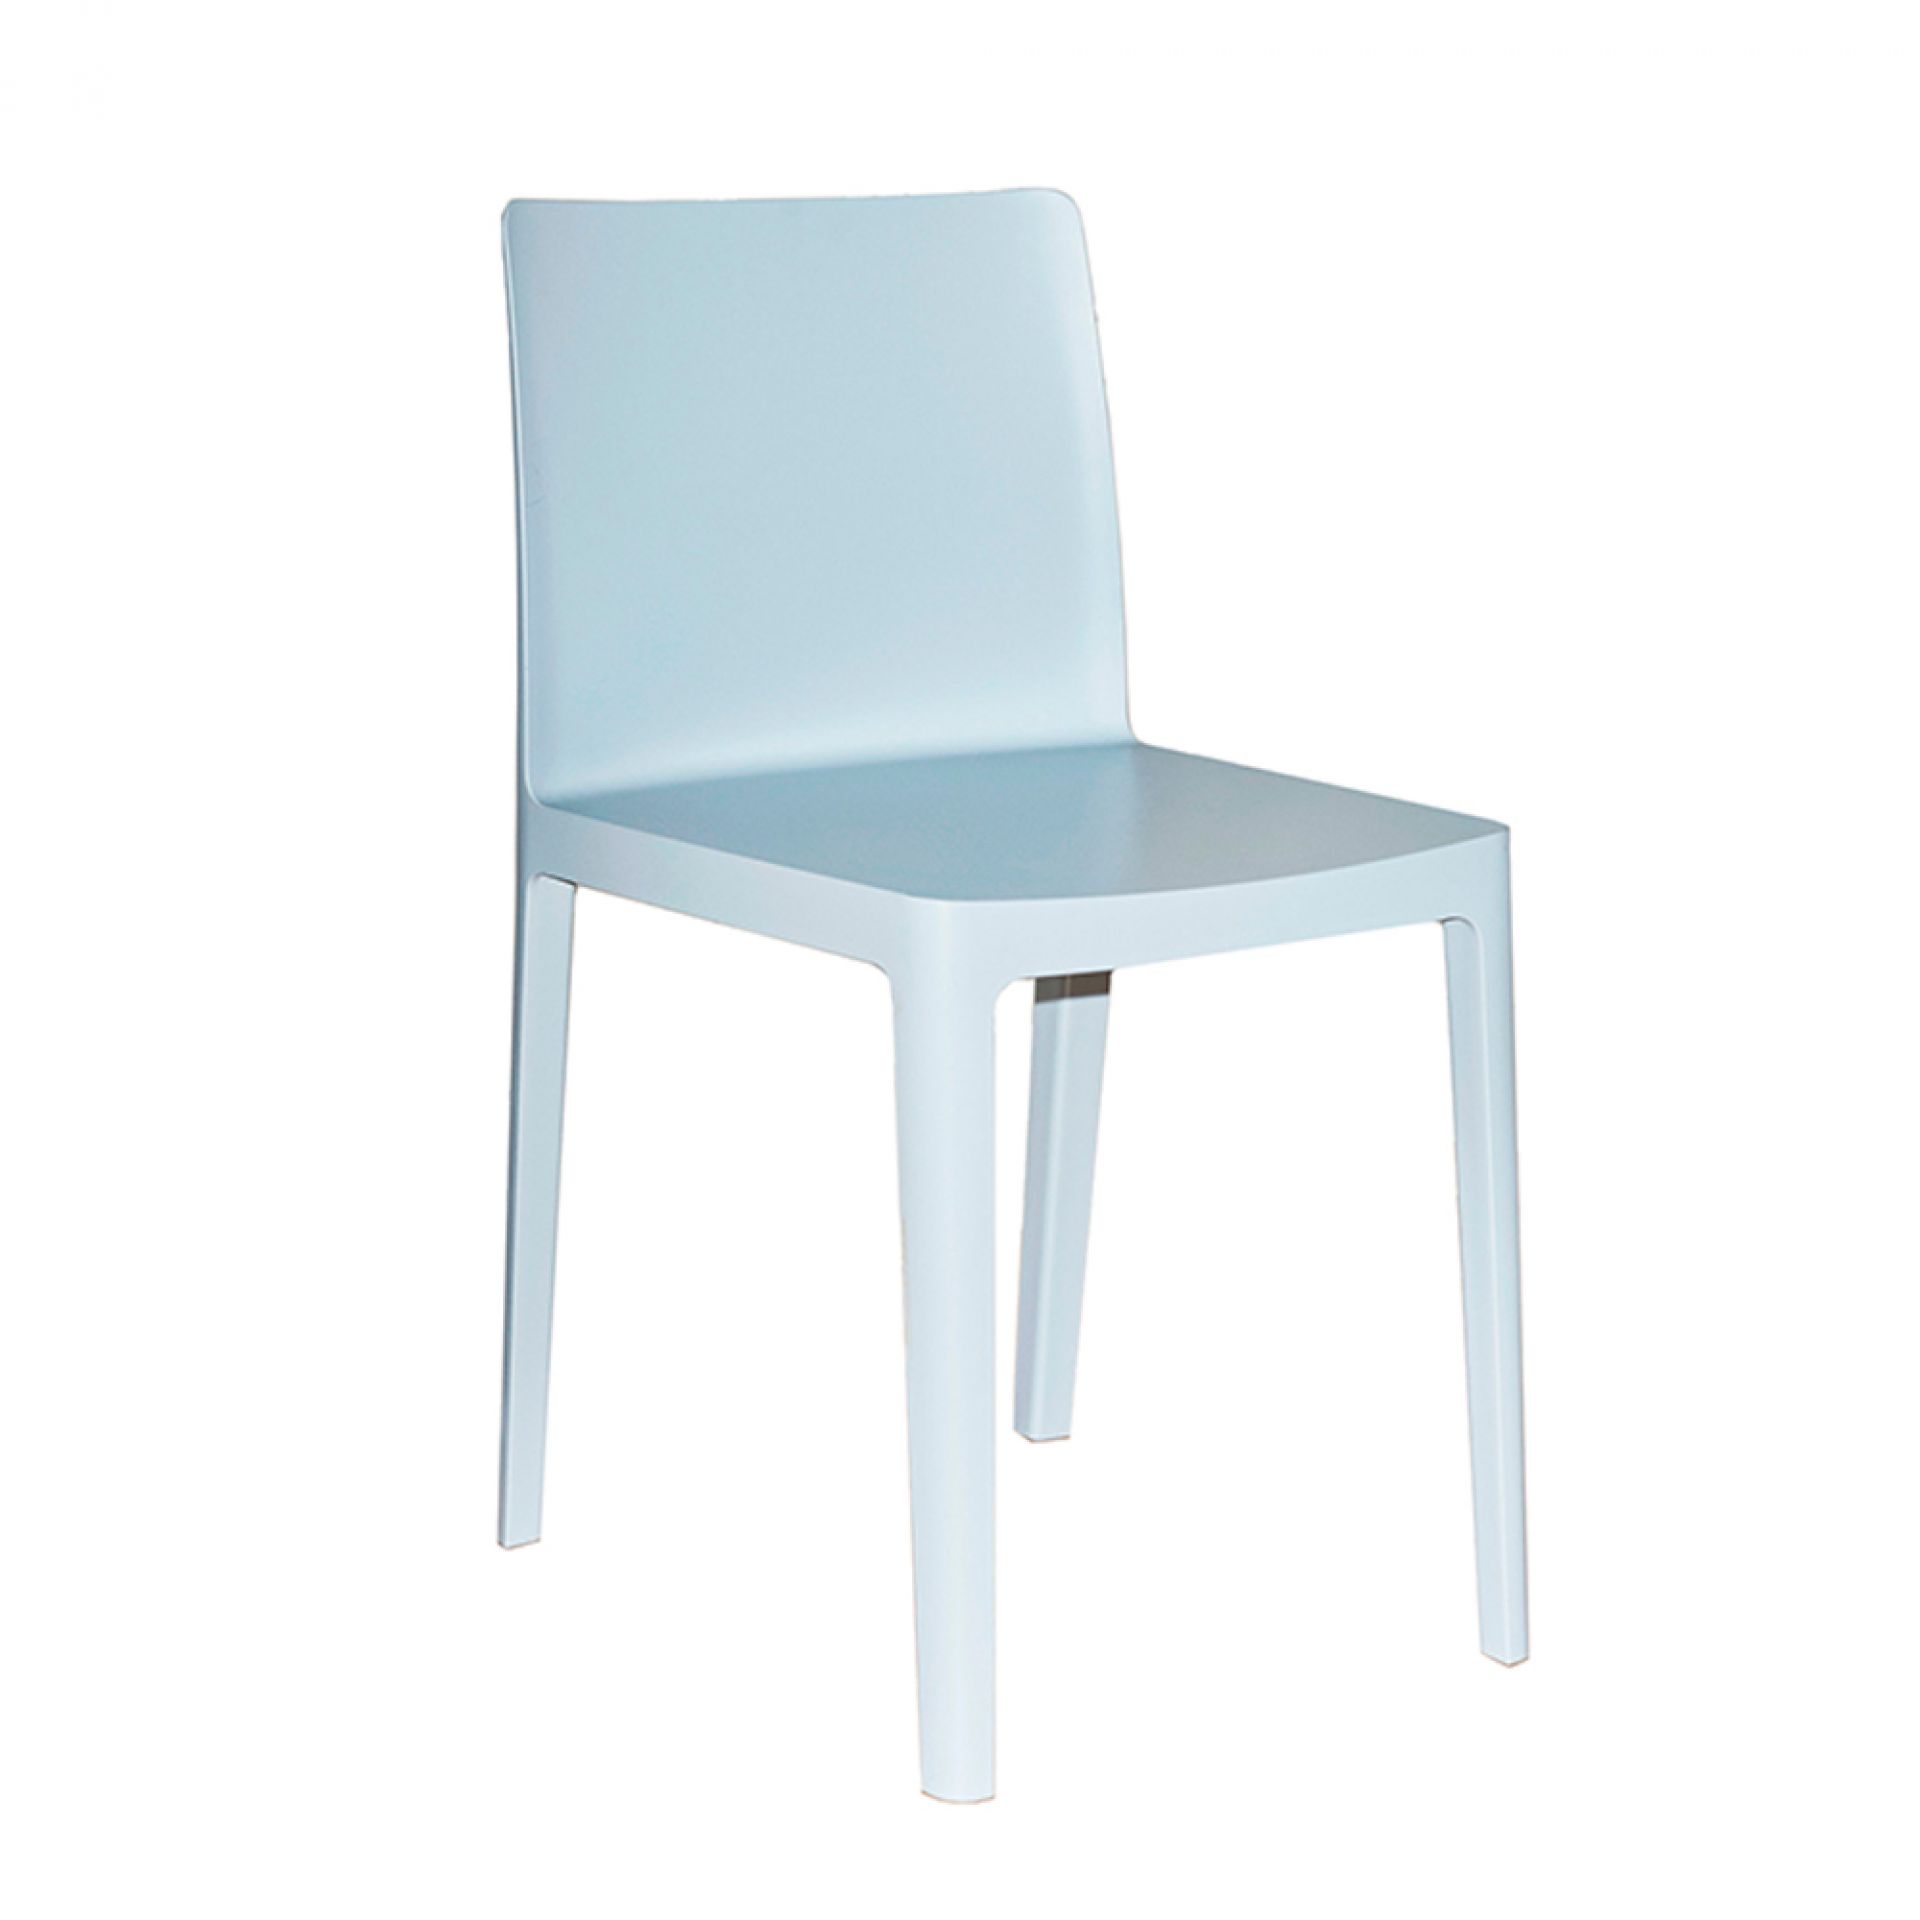 Élémentaire / Elementaire Chair Outdoor Hay | Blue grey | HAY AA602 A230